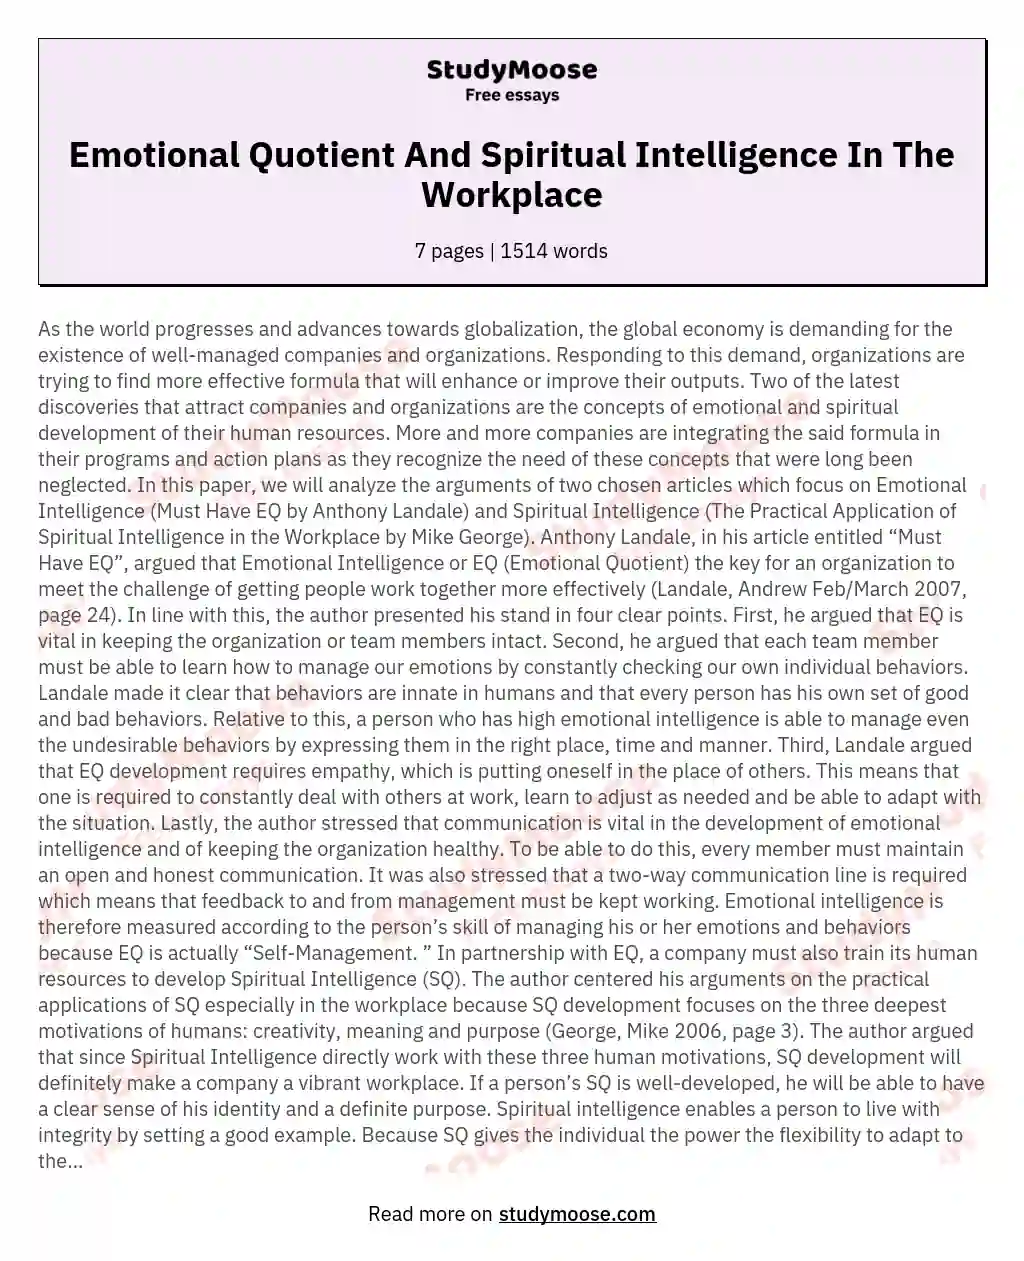 Emotional Quotient And Spiritual Intelligence In The Workplace essay